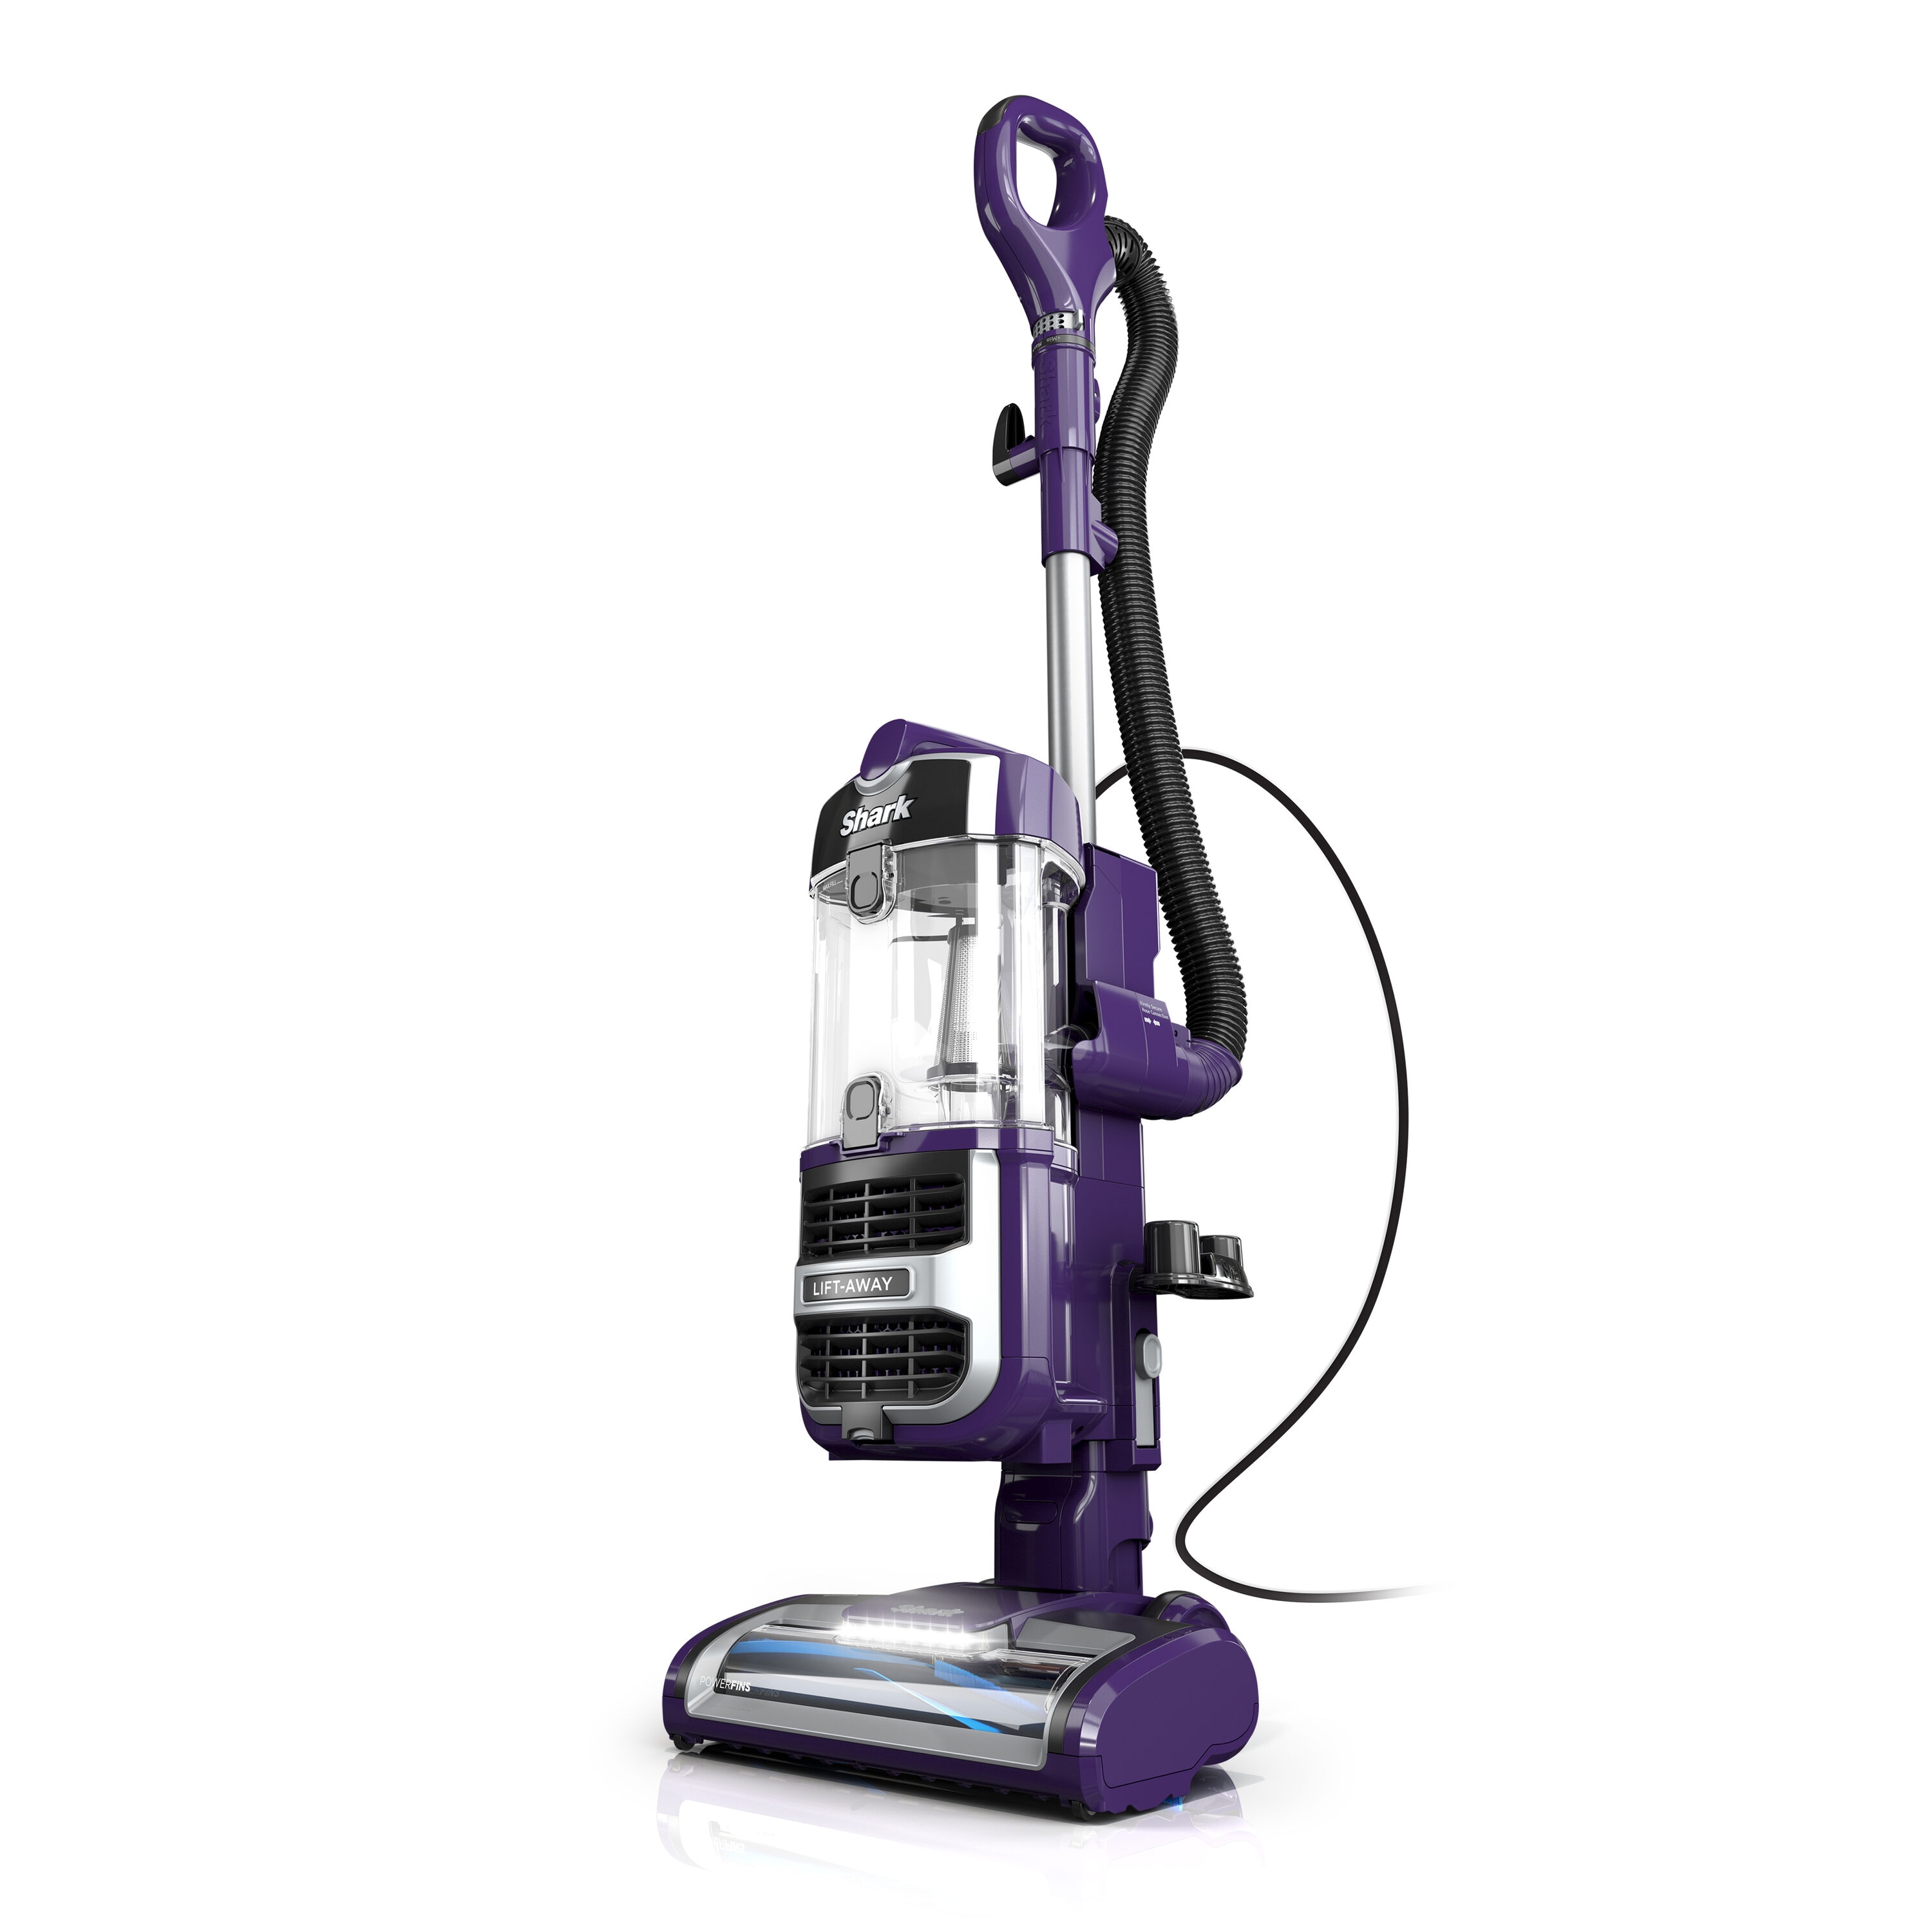 Shark Lift-Away with Powerfins, Self-Cleaning Brushroll Corded Bagless Pet  Upright Vacuum with HEPA Filter in the Upright Vacuums department at